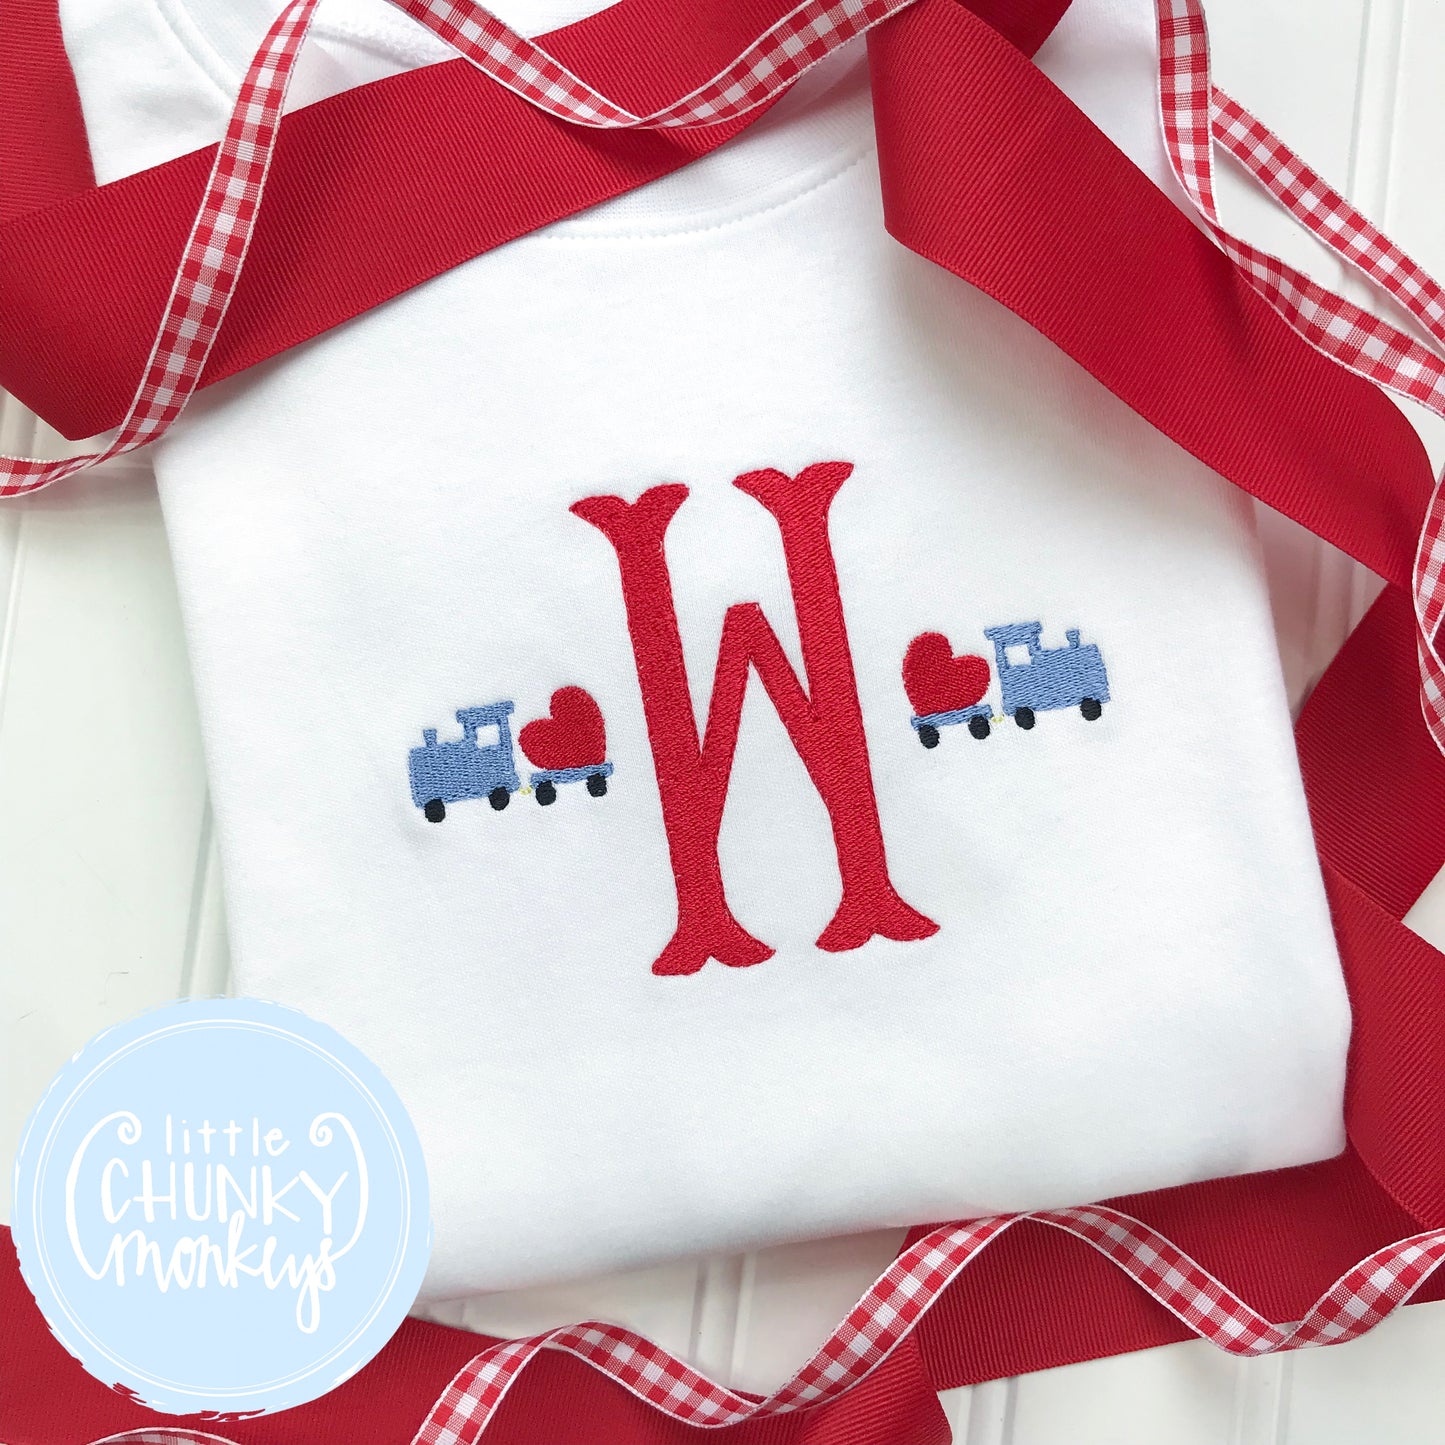 Boy Shirt - Valentine Shirt- Single Initial with Mini Trains carrying Hearts